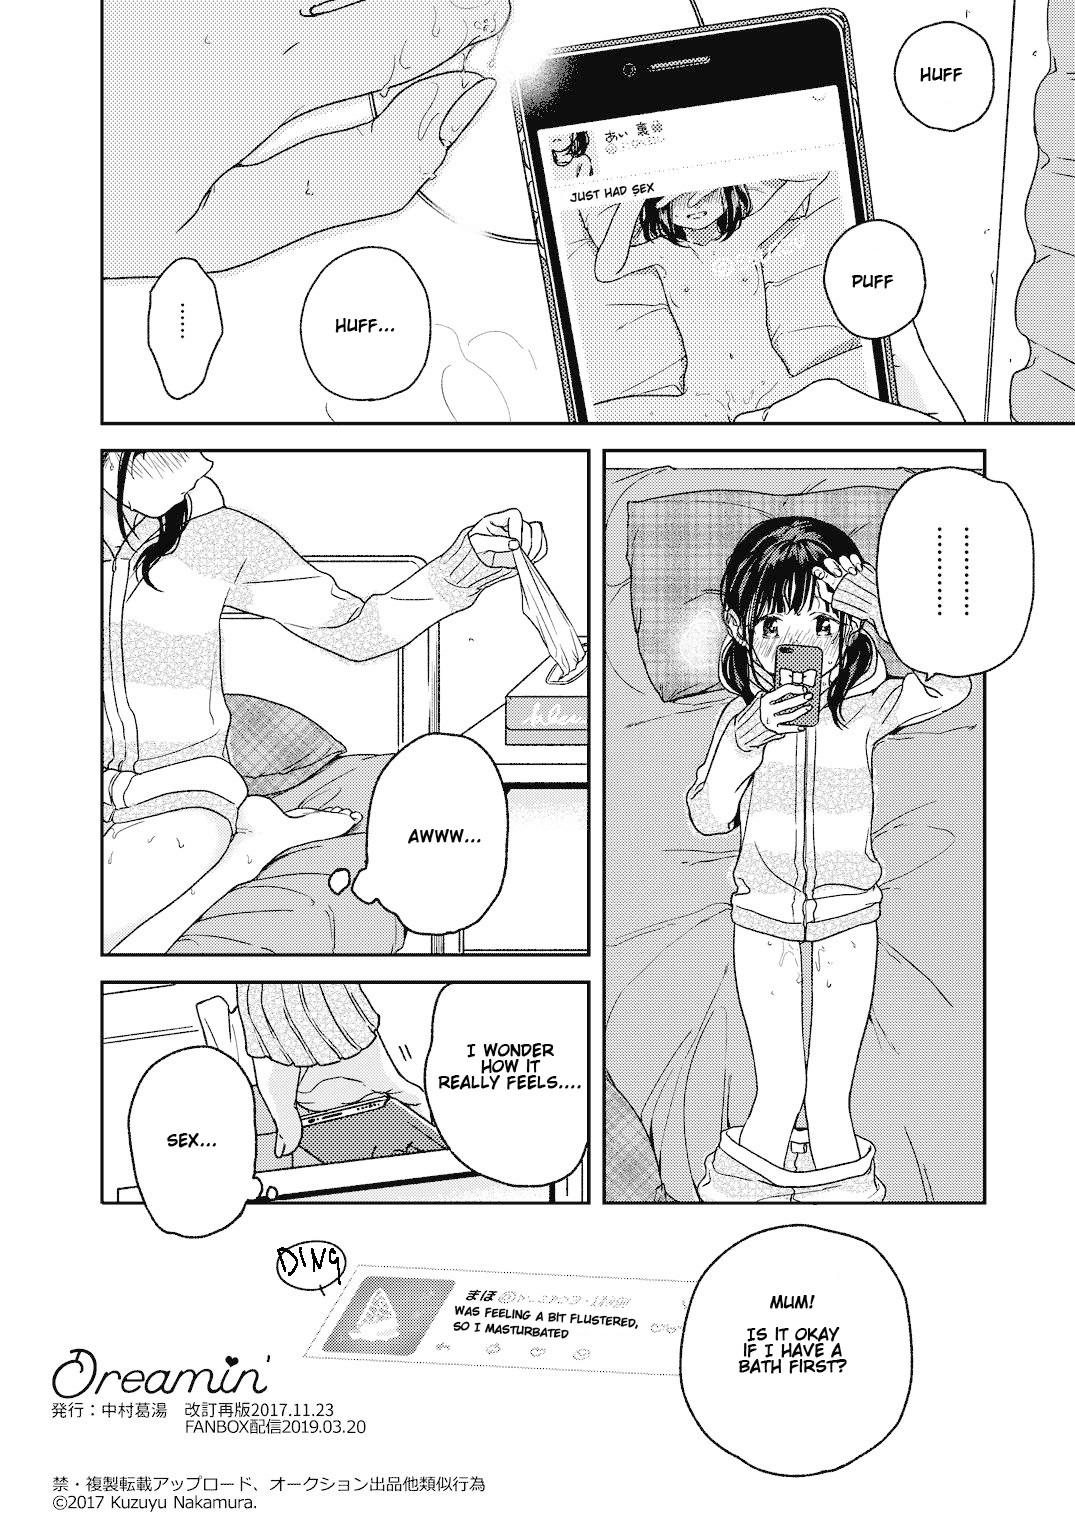 Couples Fucking Dreamin' - Original Indonesia - Page 8